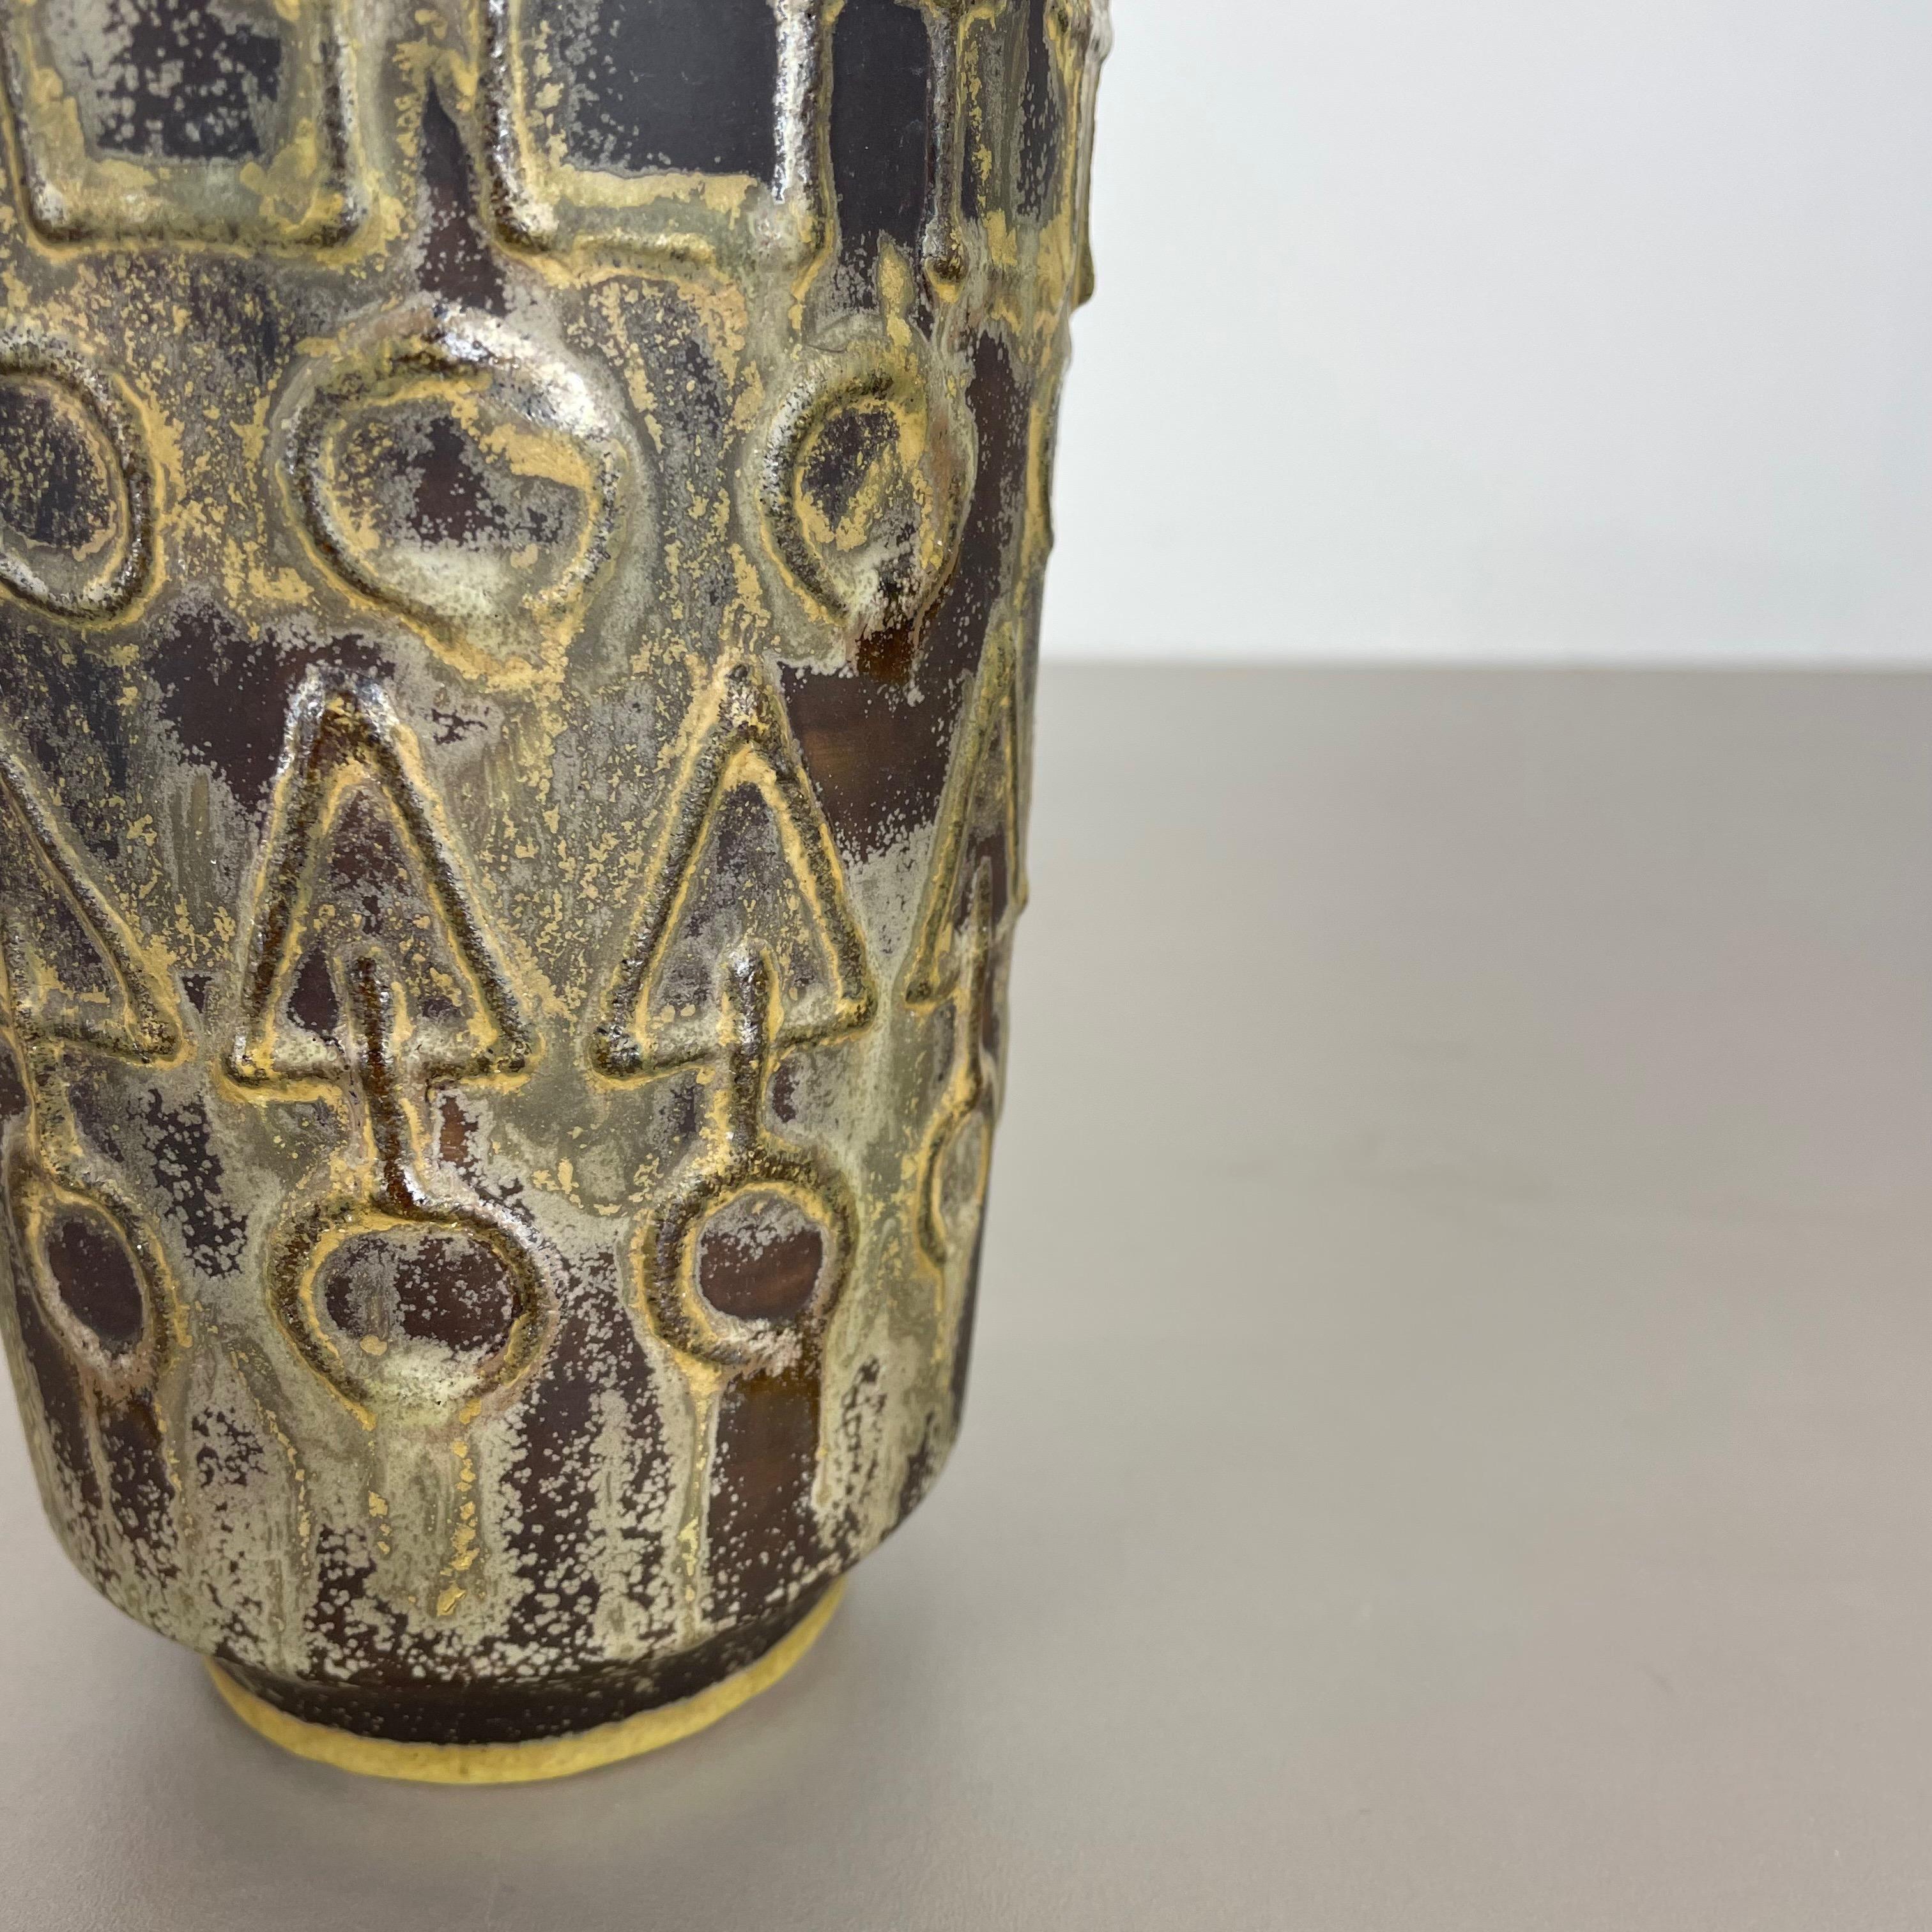 Vintage Abstract Ceramic Pottery Vase by Simon Peter Gerz, Germany, 1960s For Sale 3